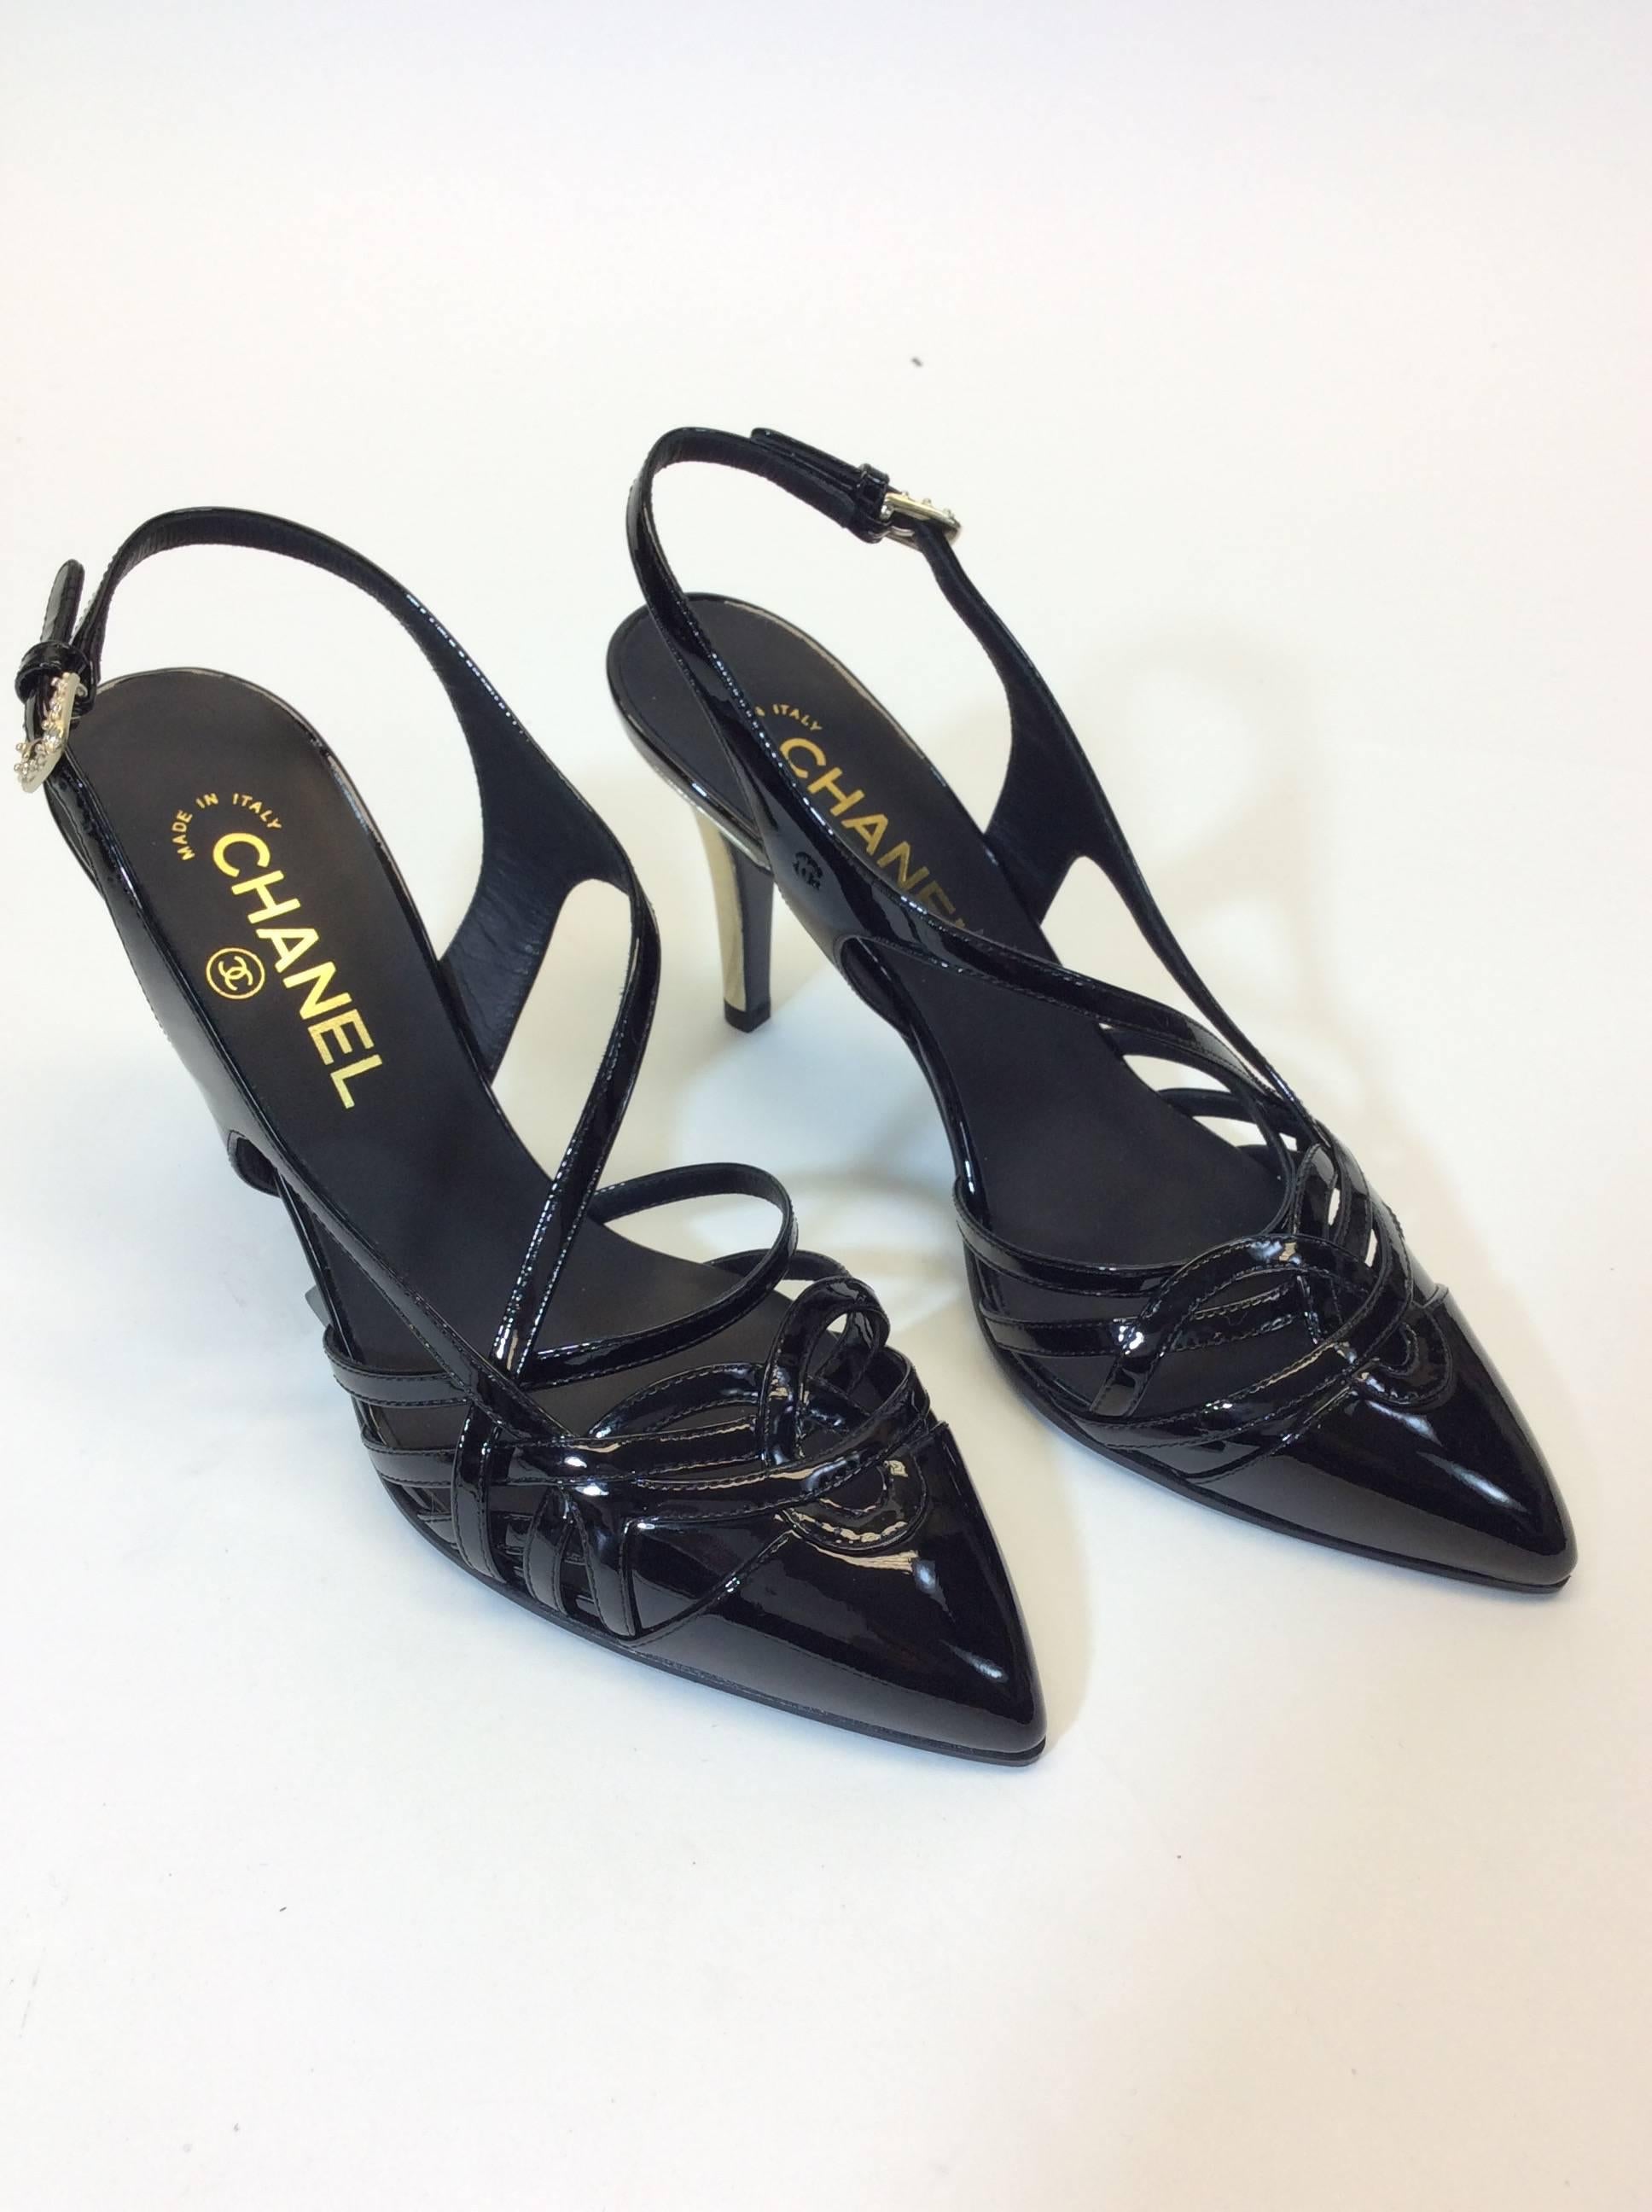 Chanel Black Patent Leather Strap Heel In Excellent Condition For Sale In Narberth, PA